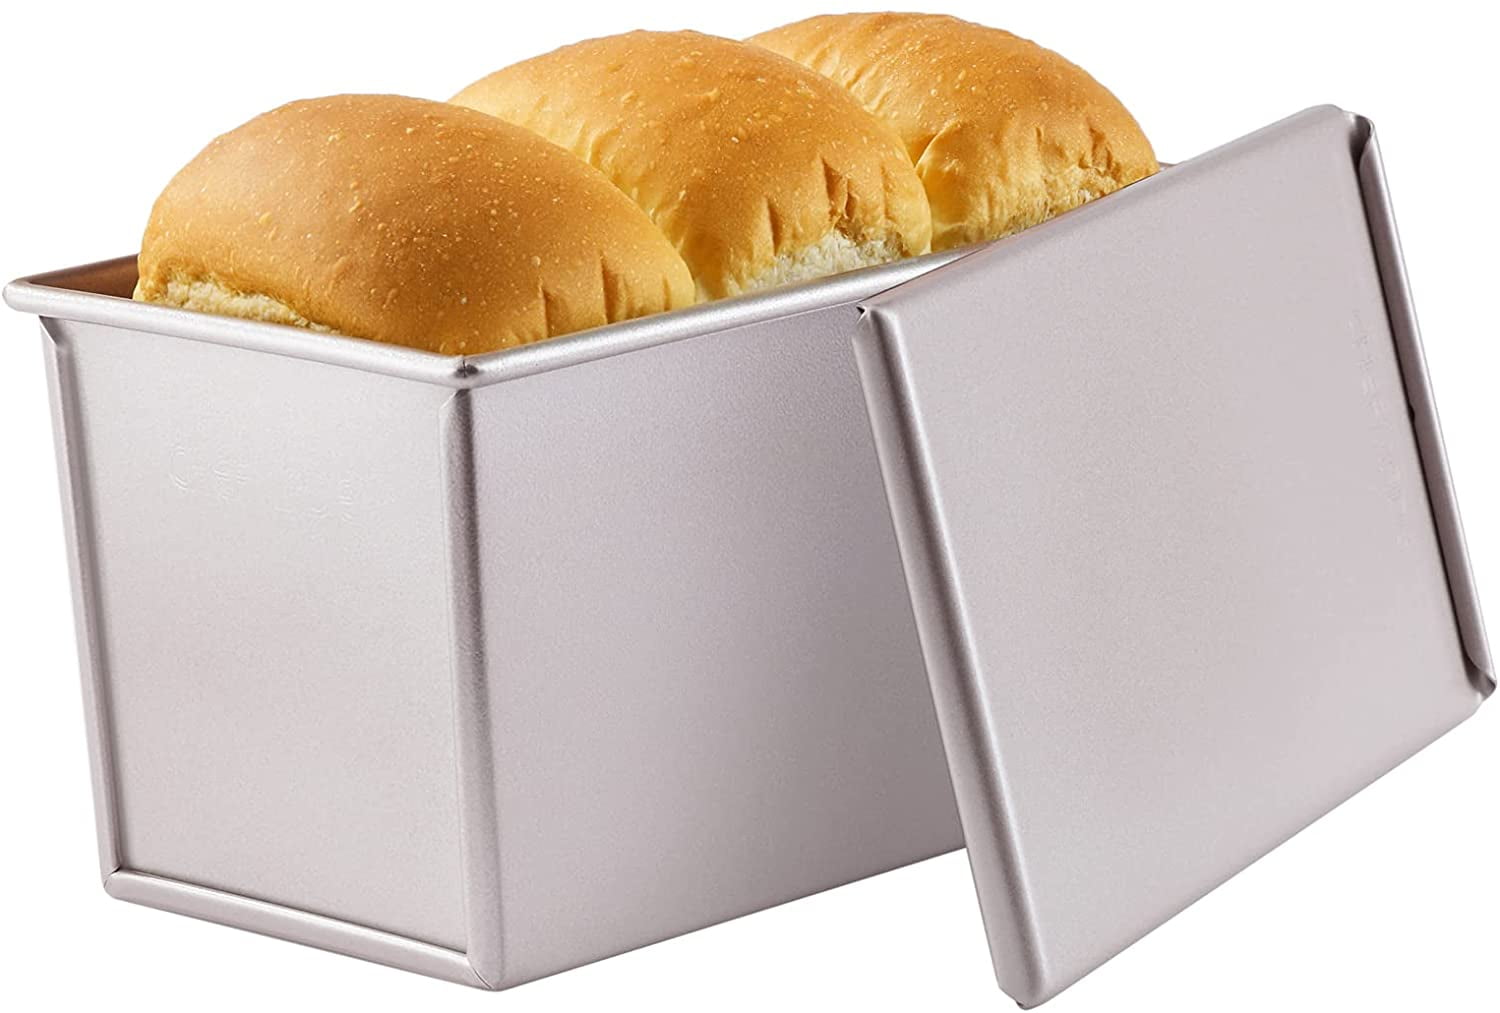 OJelay Bread Pan with Lid 1Lb Capacity Nonstick Homemade Bread Mold With Cover Pullman Loaf Pan 8.5 x 4.5 x 4.3 Inches 